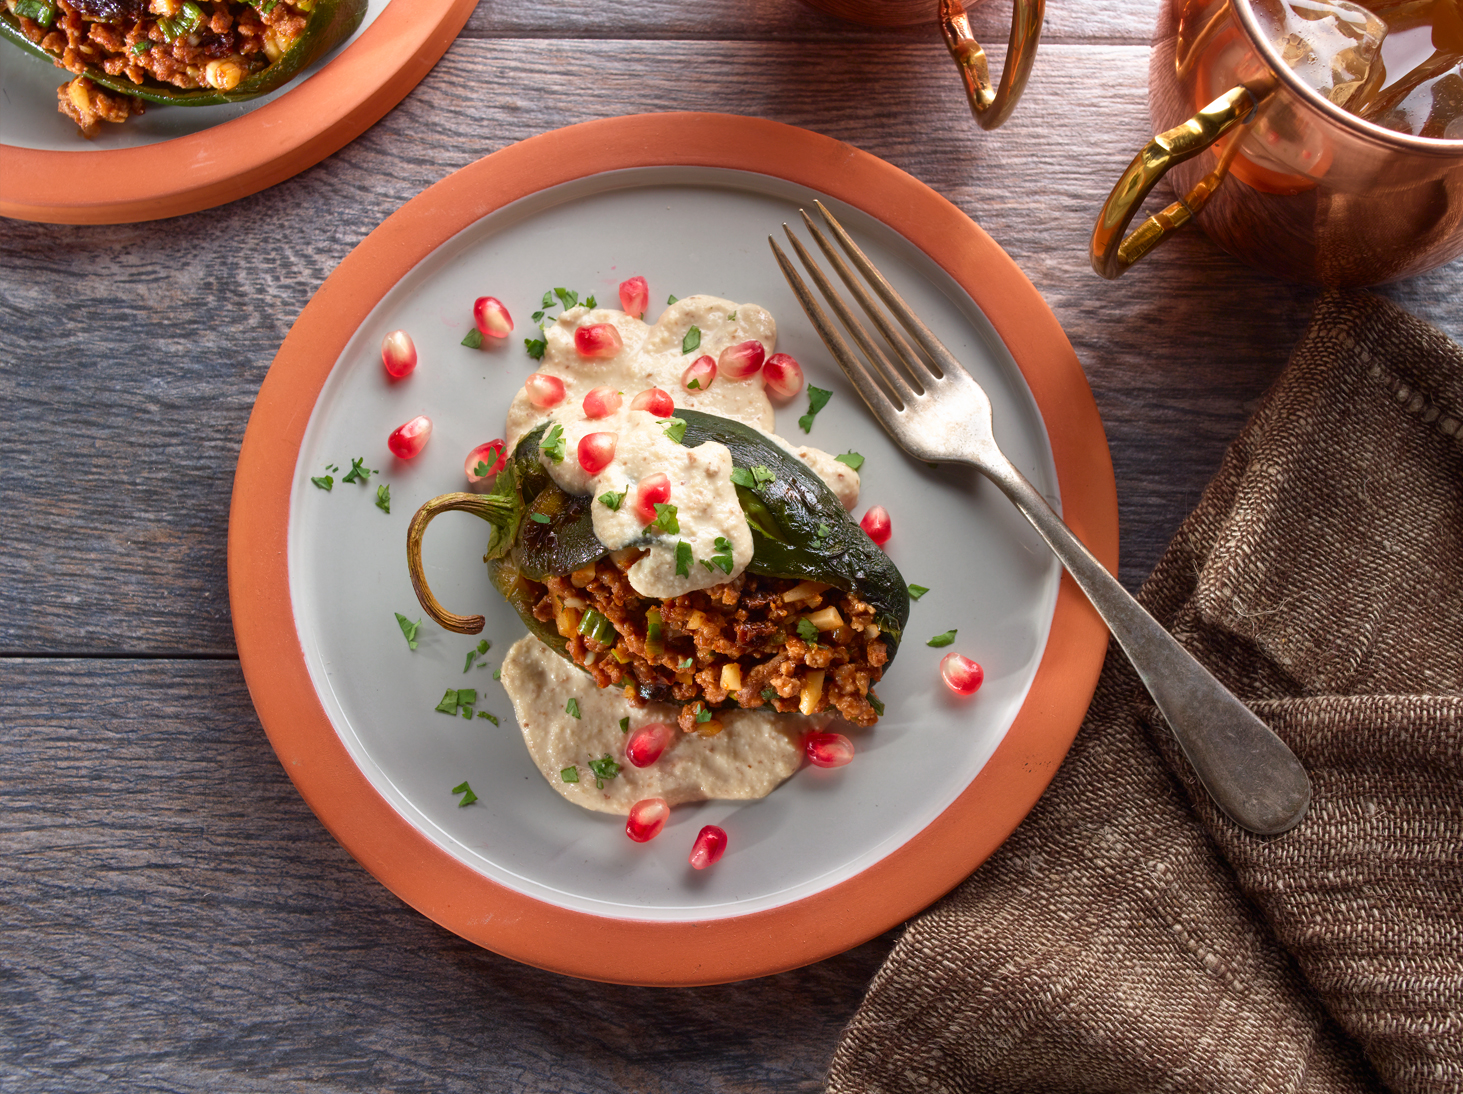 Stuffed Poblano Peppers with Walnut Sauce - Chiles en Nogada